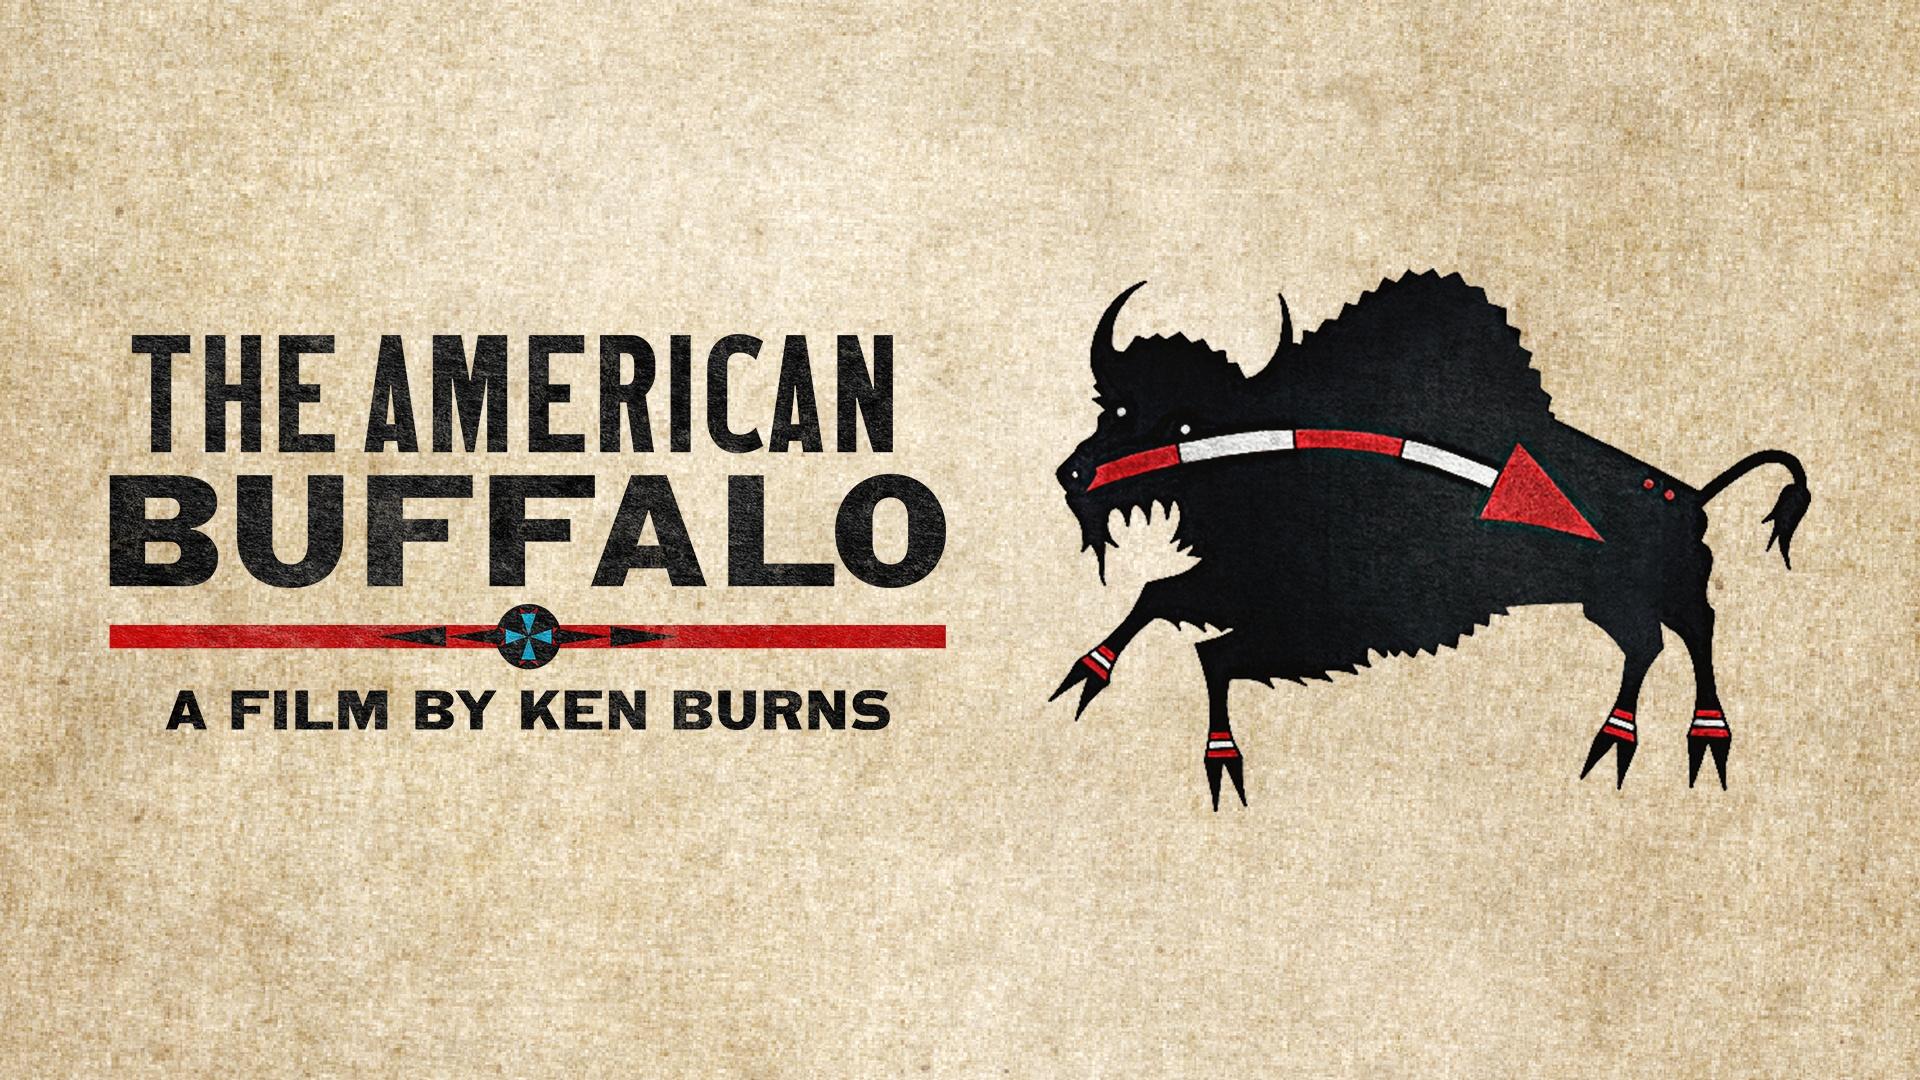 The American Buffalo A Film by Ken Burns - Buffalo art in black, white and red with arrow